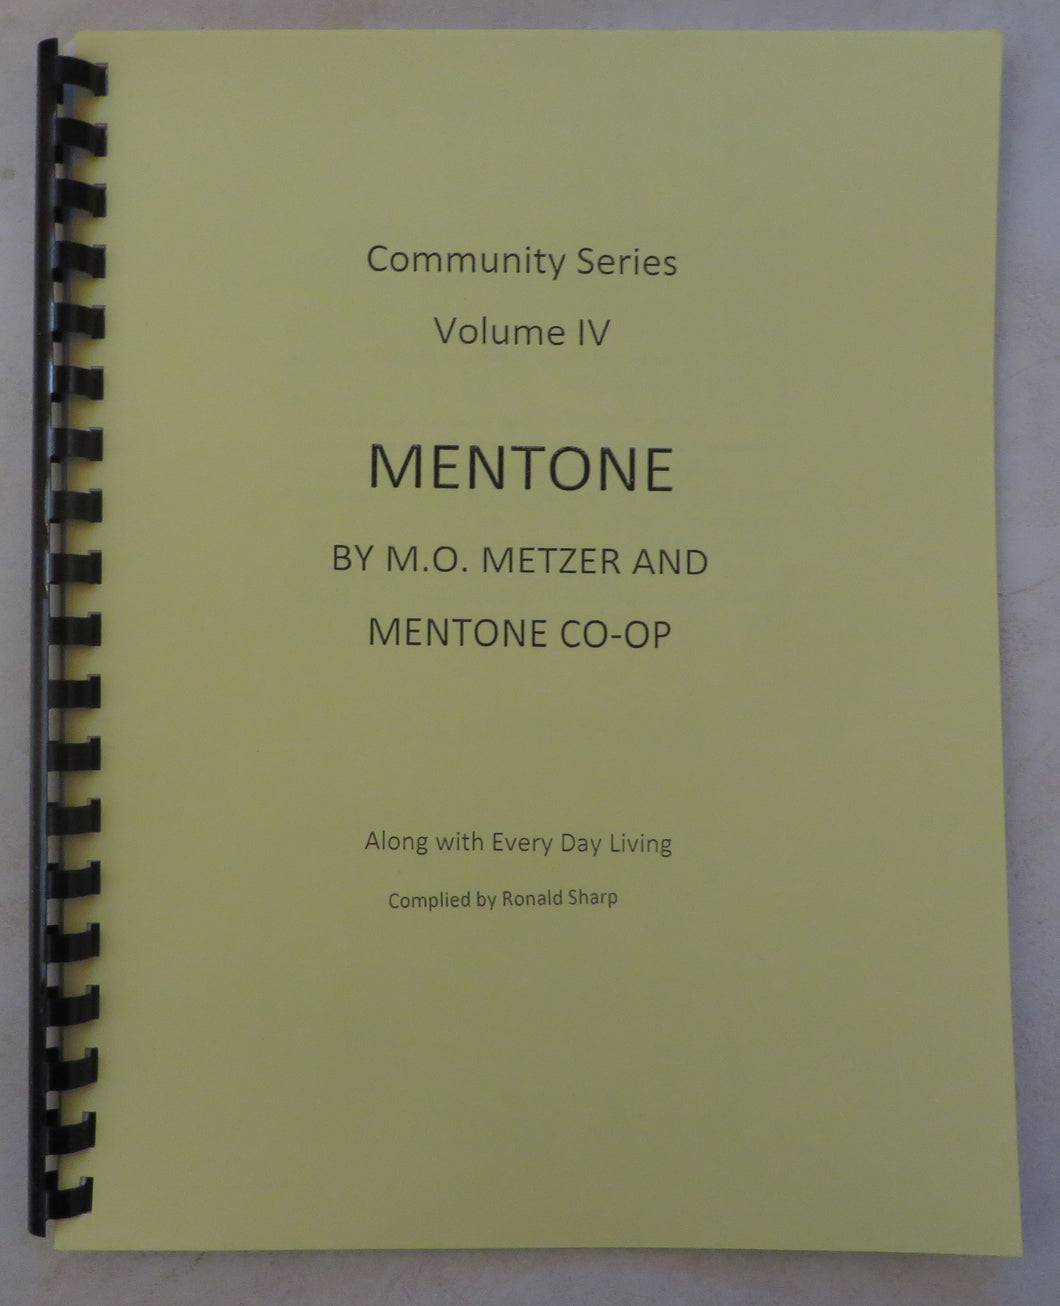 Community Series, Volume 4, Mentoe by M.O. Metzger and Mentone Co-op